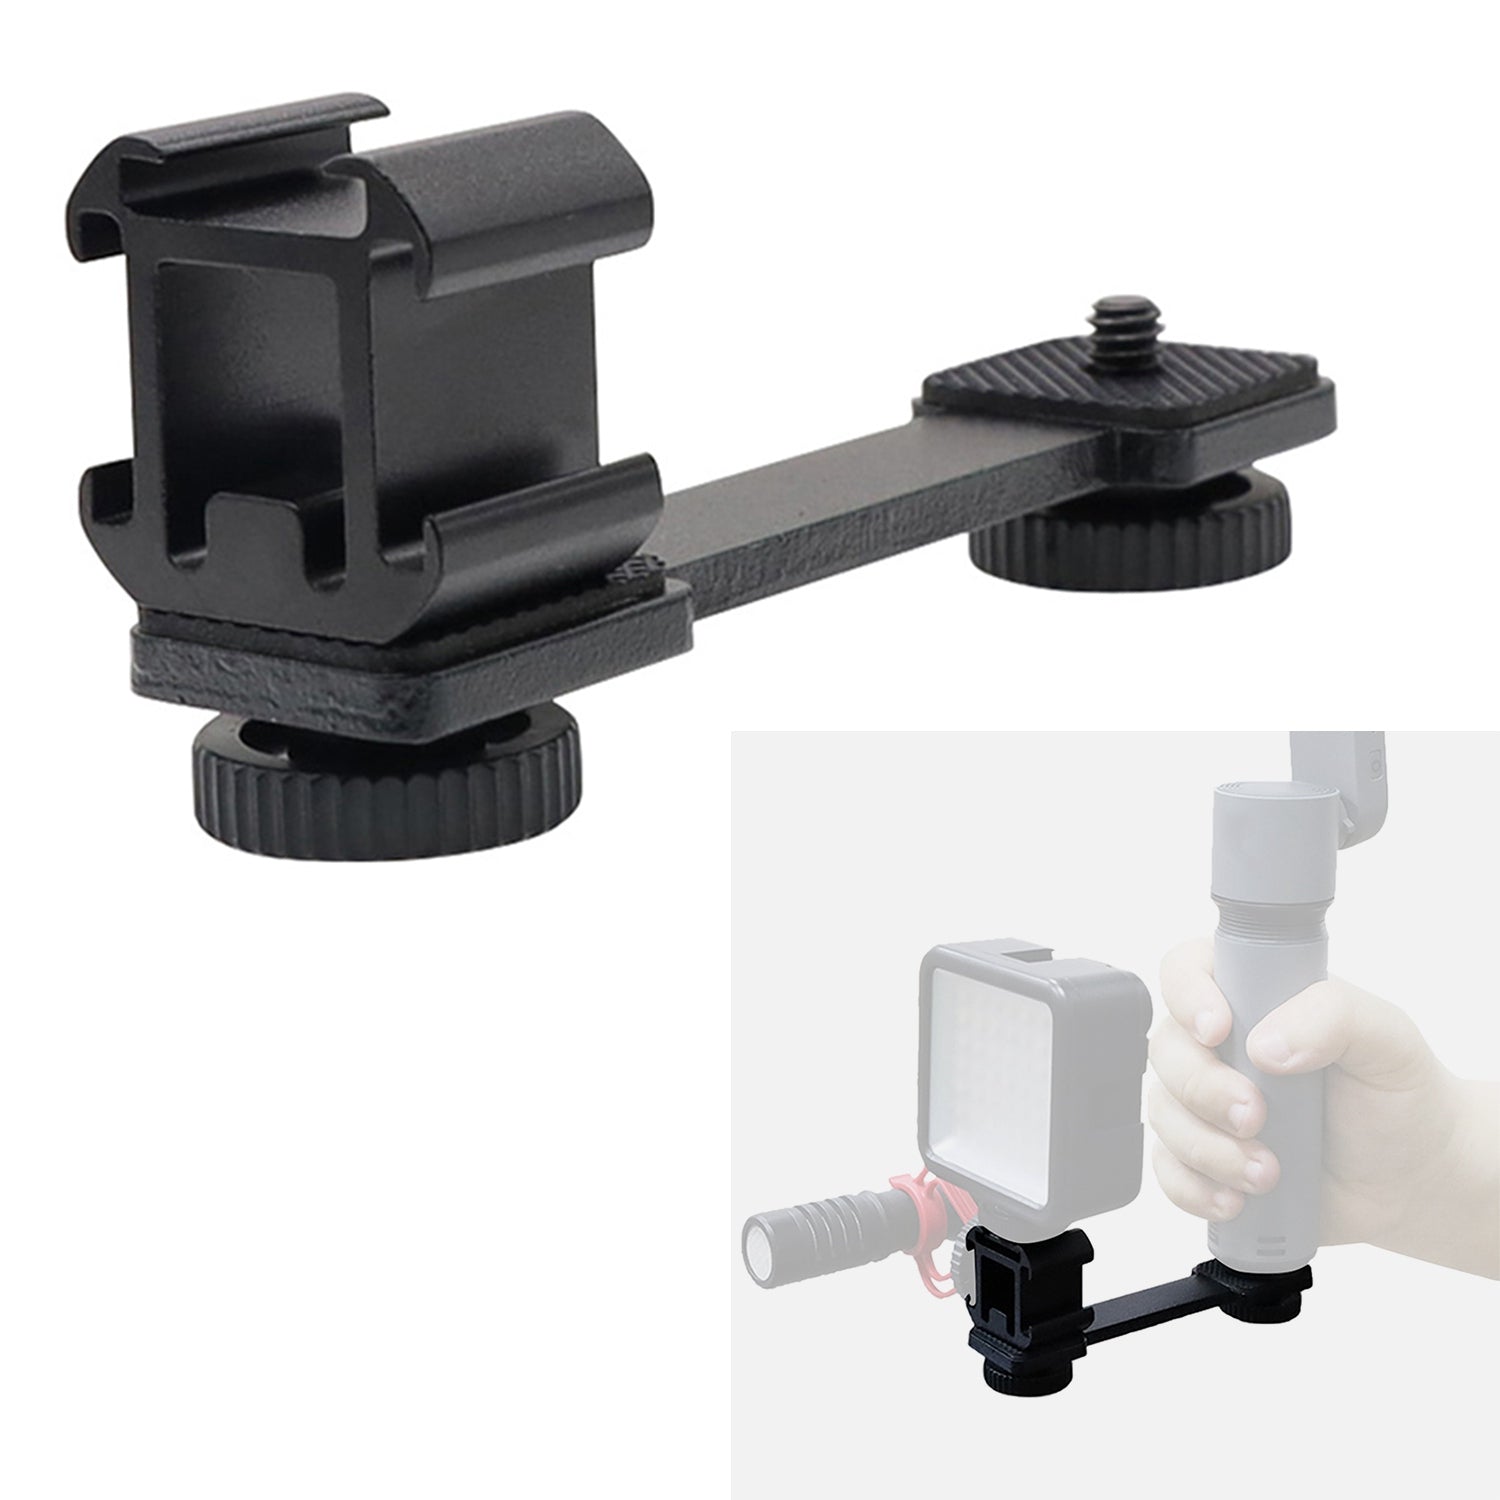 E022 Three Hot Shoe Bracket for DJI Zhiyun Smooth Lightweight Portable Camera Mount Adapter with 1/4” Screw for Fill Light Handheld Gimbal Support Multi-Angle Adjustable